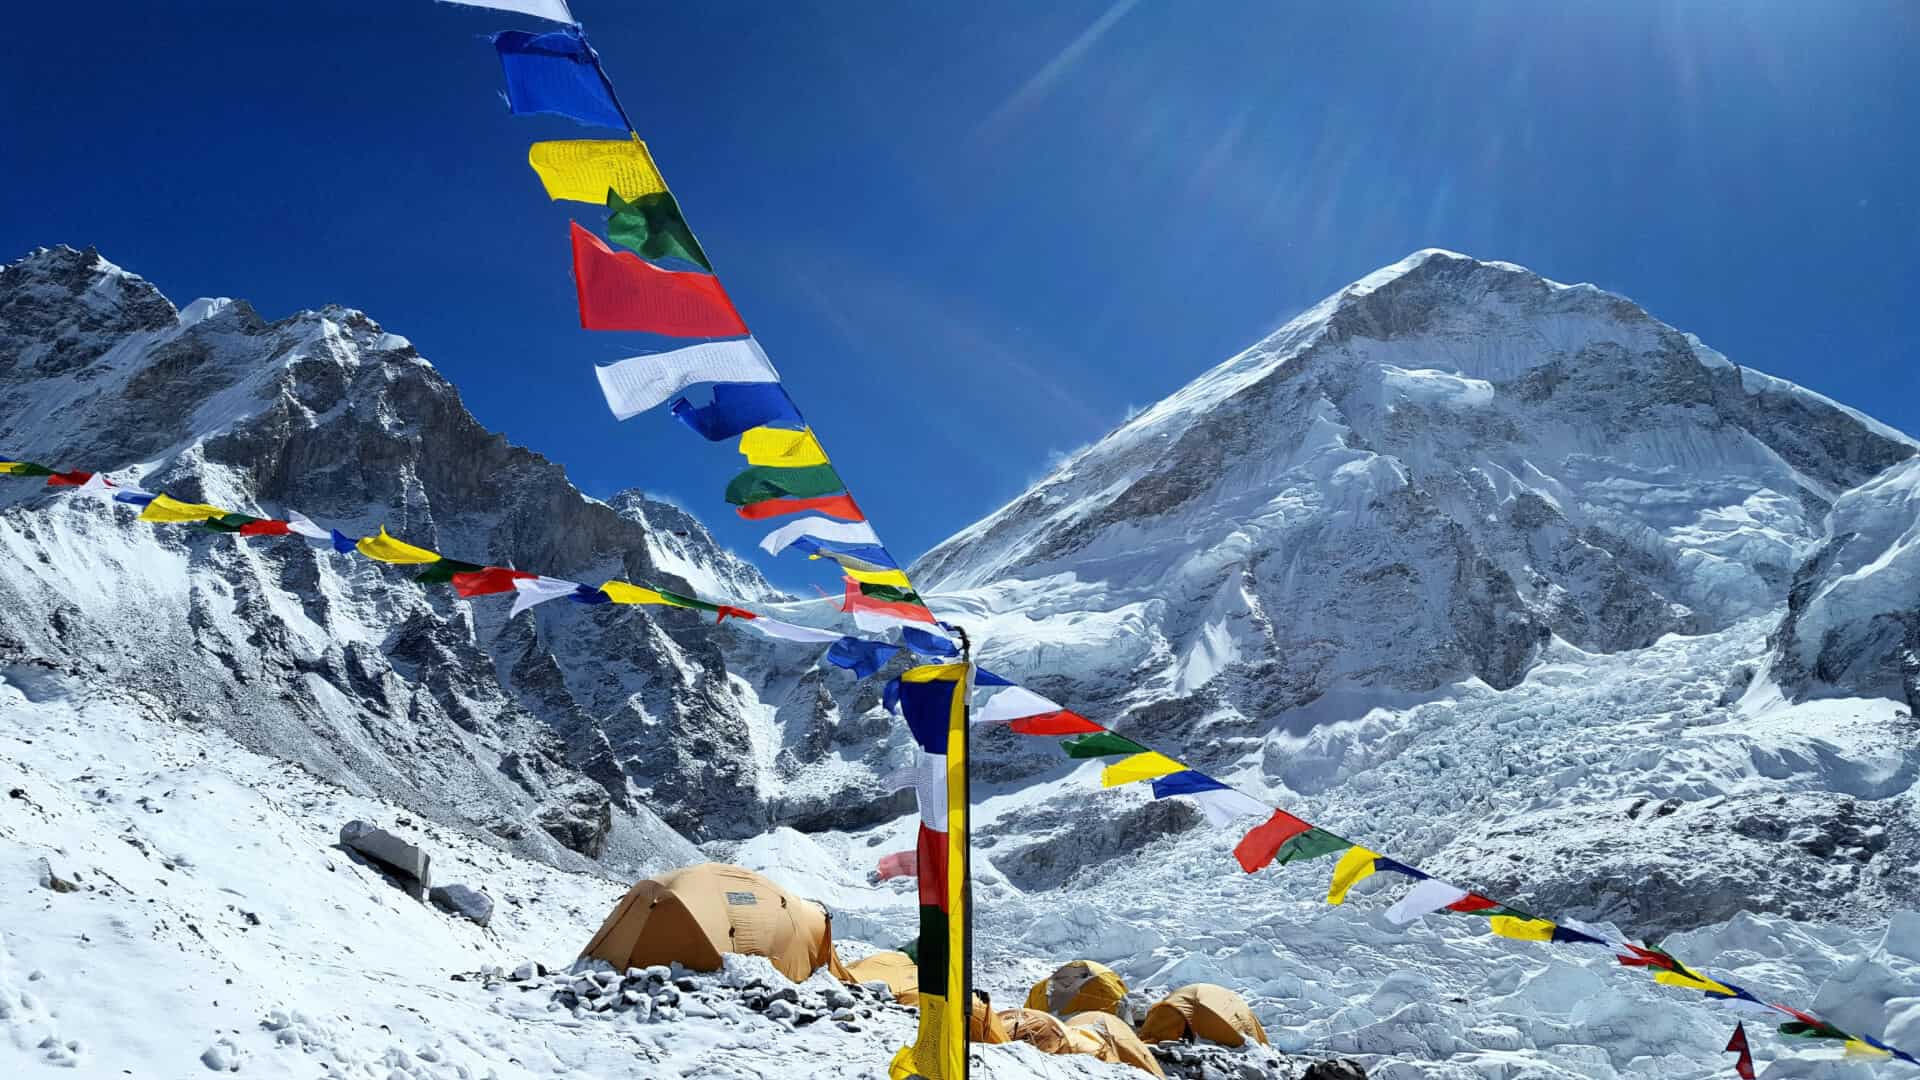 Everest Base Camp Trek - My Everest Trip - Tours and Trekking in Nepal